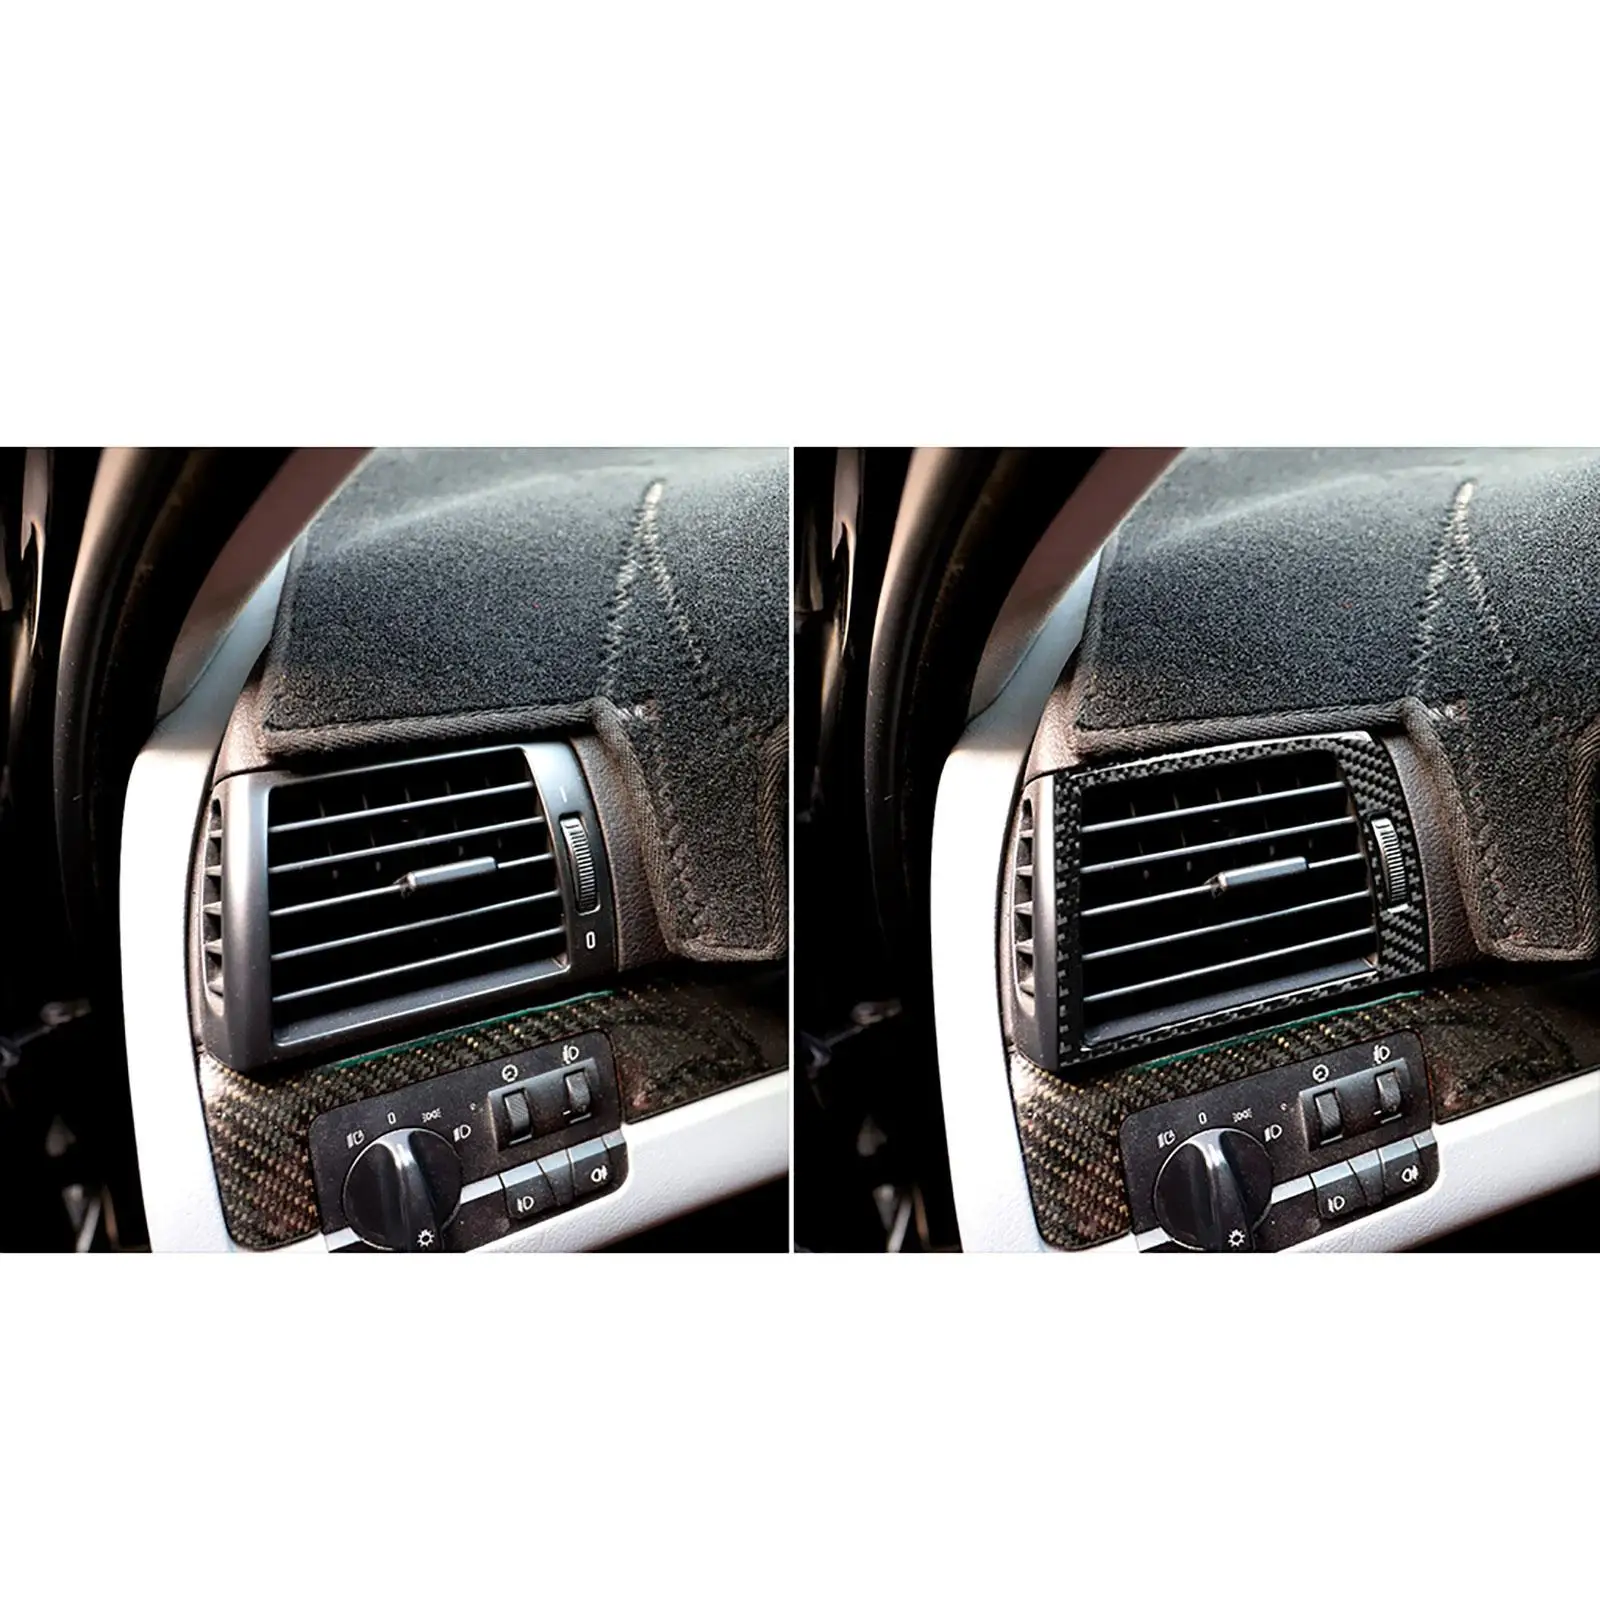 2x Vehicle Dashboard Air Vent trim cover for BMW 3 Series E46 Accessory